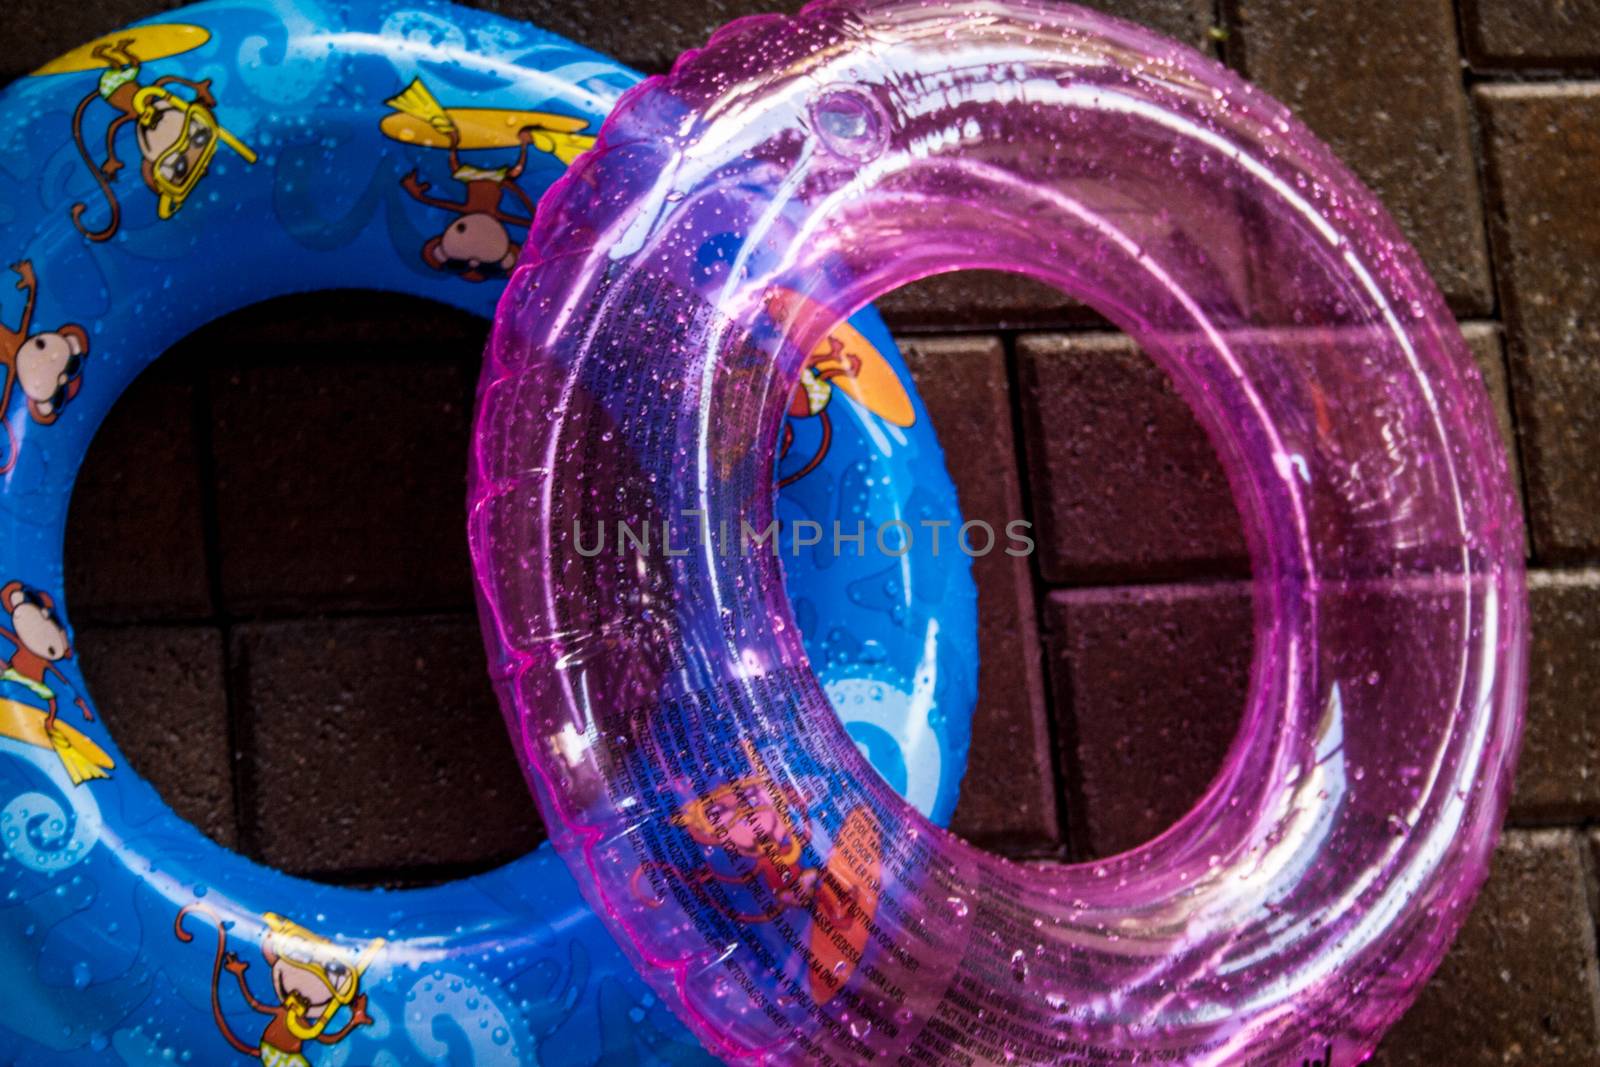 colorful swimming ring  blue and purple on brick floor